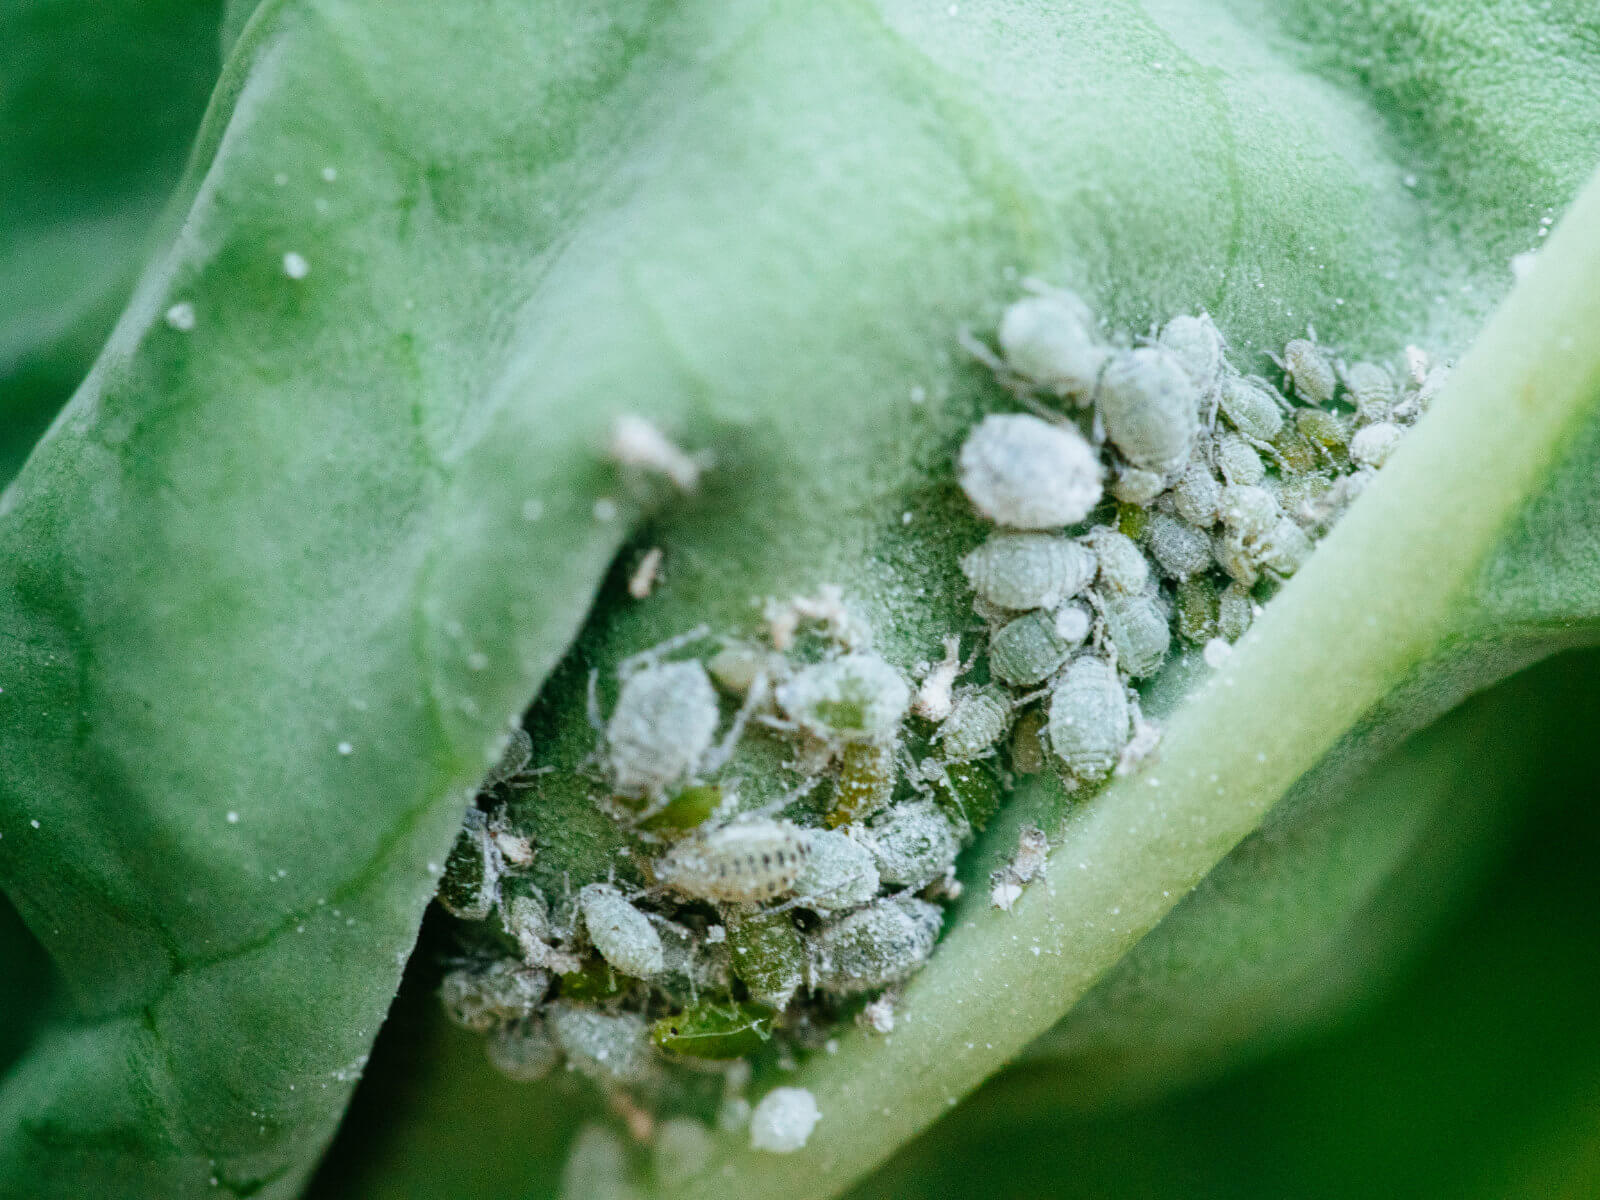 Gray aphids on the underside of a leaf